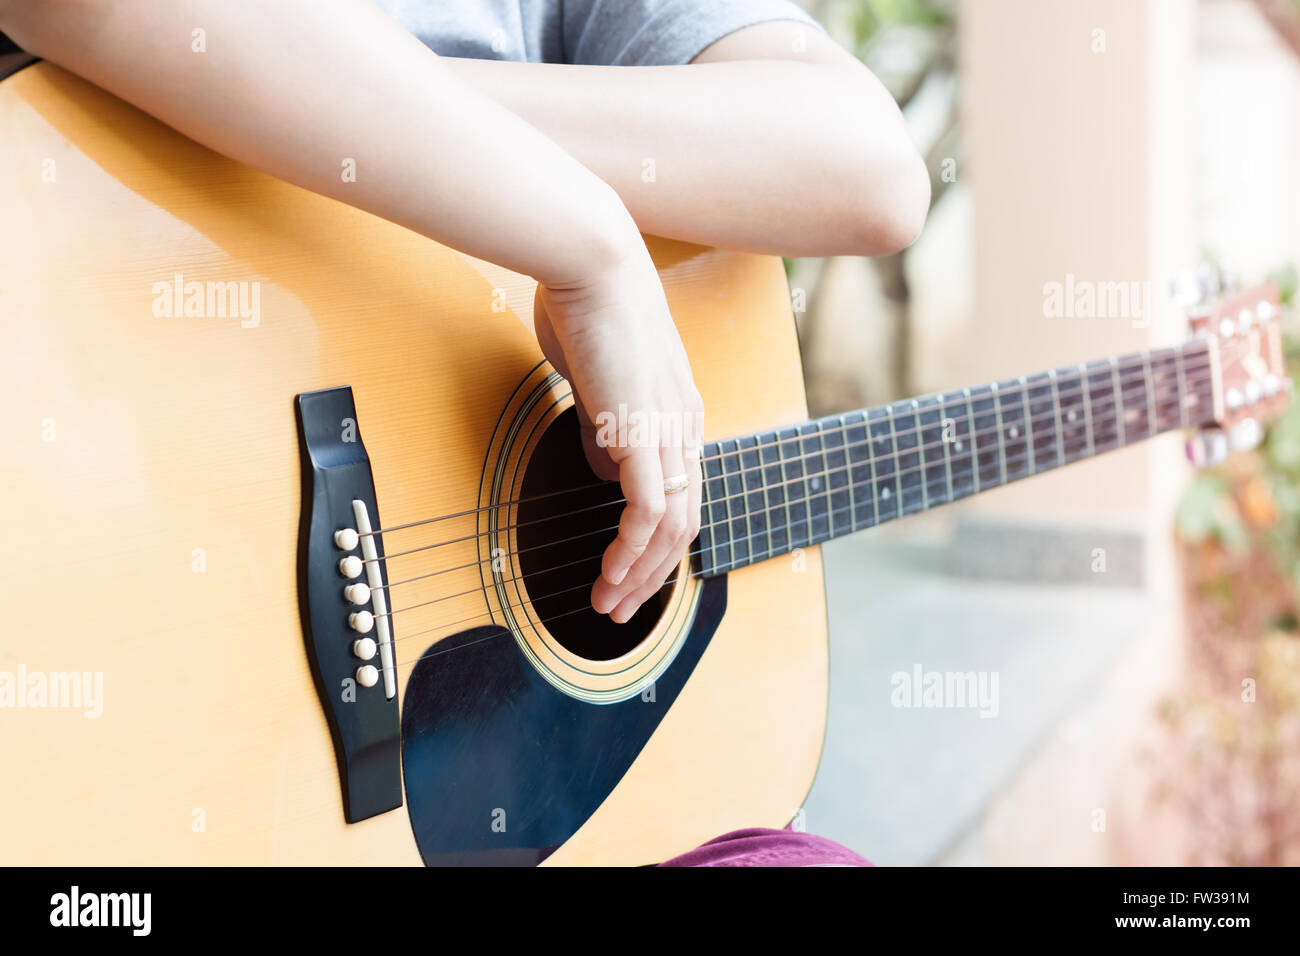 Woman's hands with acoustic guitar in relax post, stock photo Stock Photo